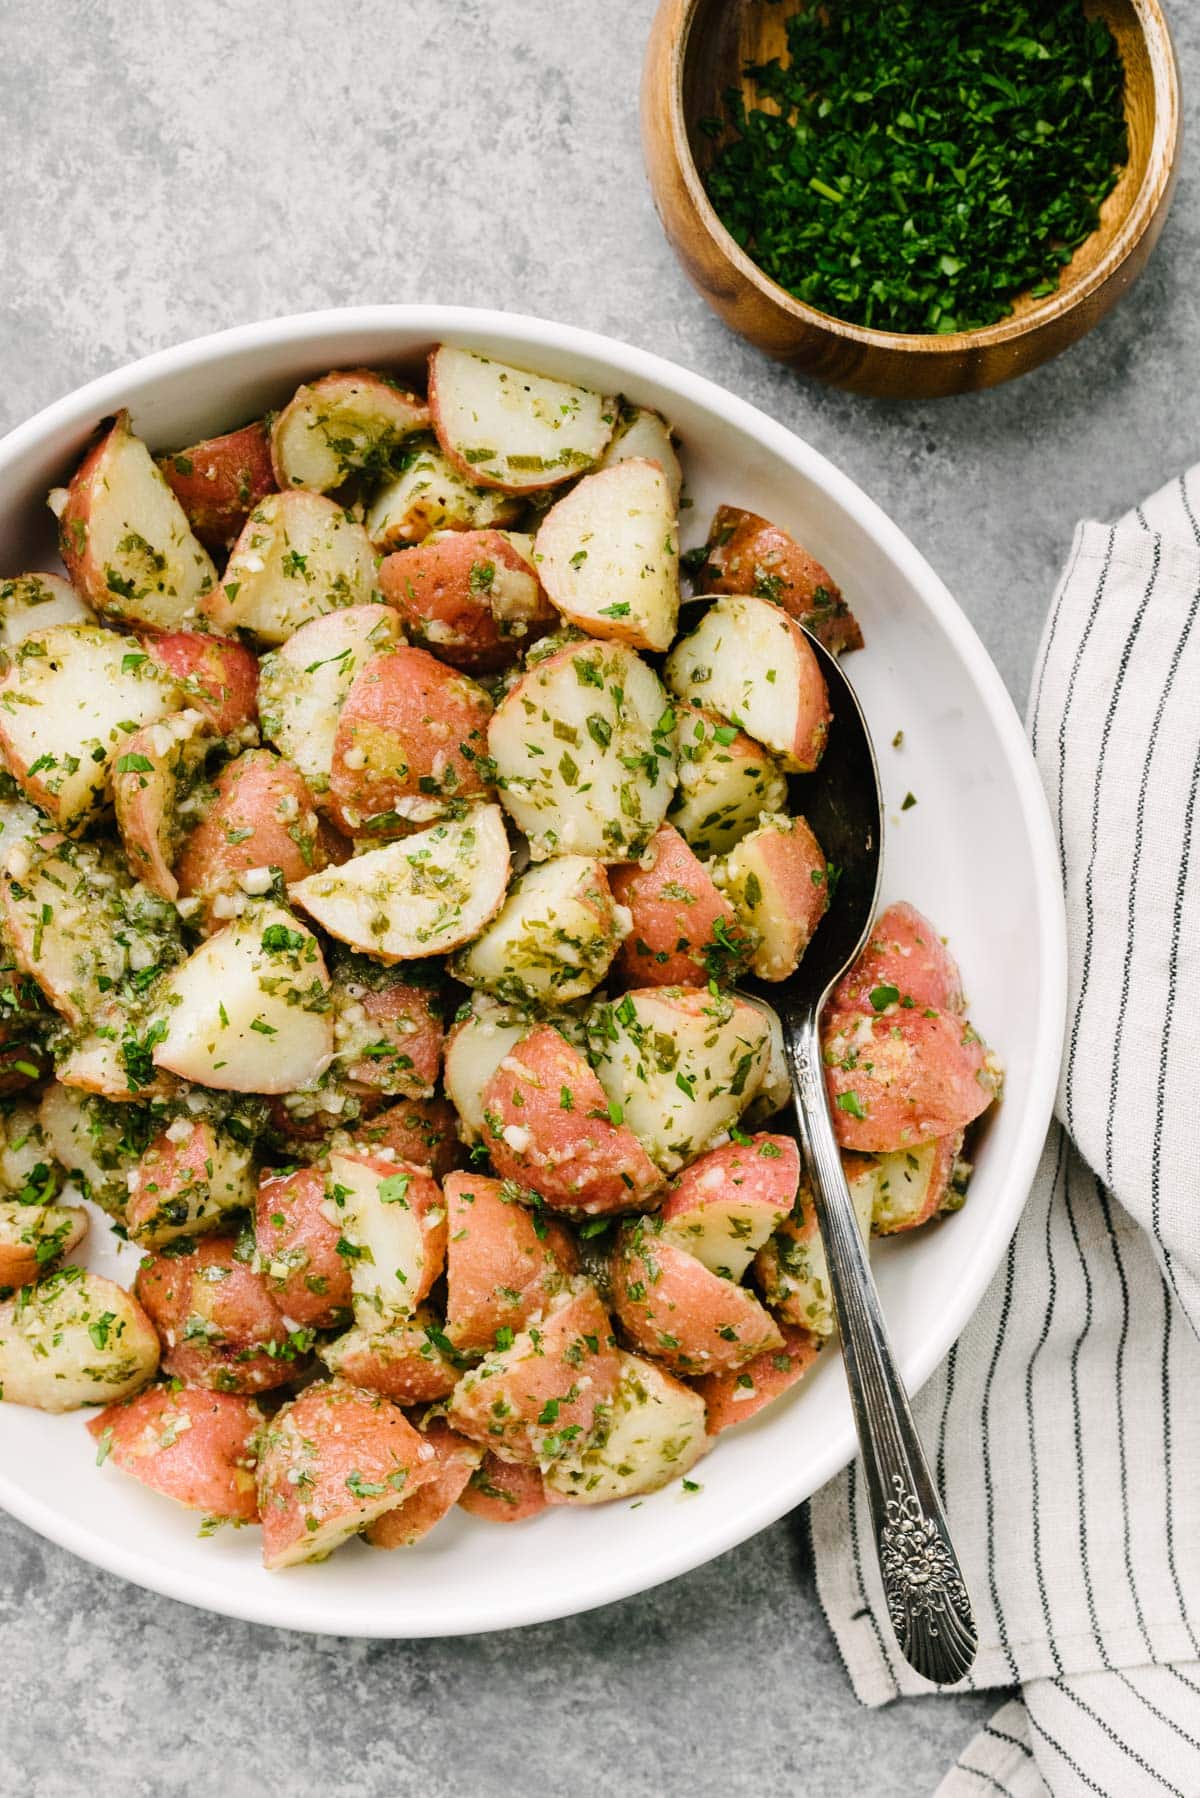 Italian potato salad with vinaigrette dressing in a large white serving bowl with a silver spoon tucked into the potatoes; a striped linen napkin and small bowl of fresh minced herbs to the side.